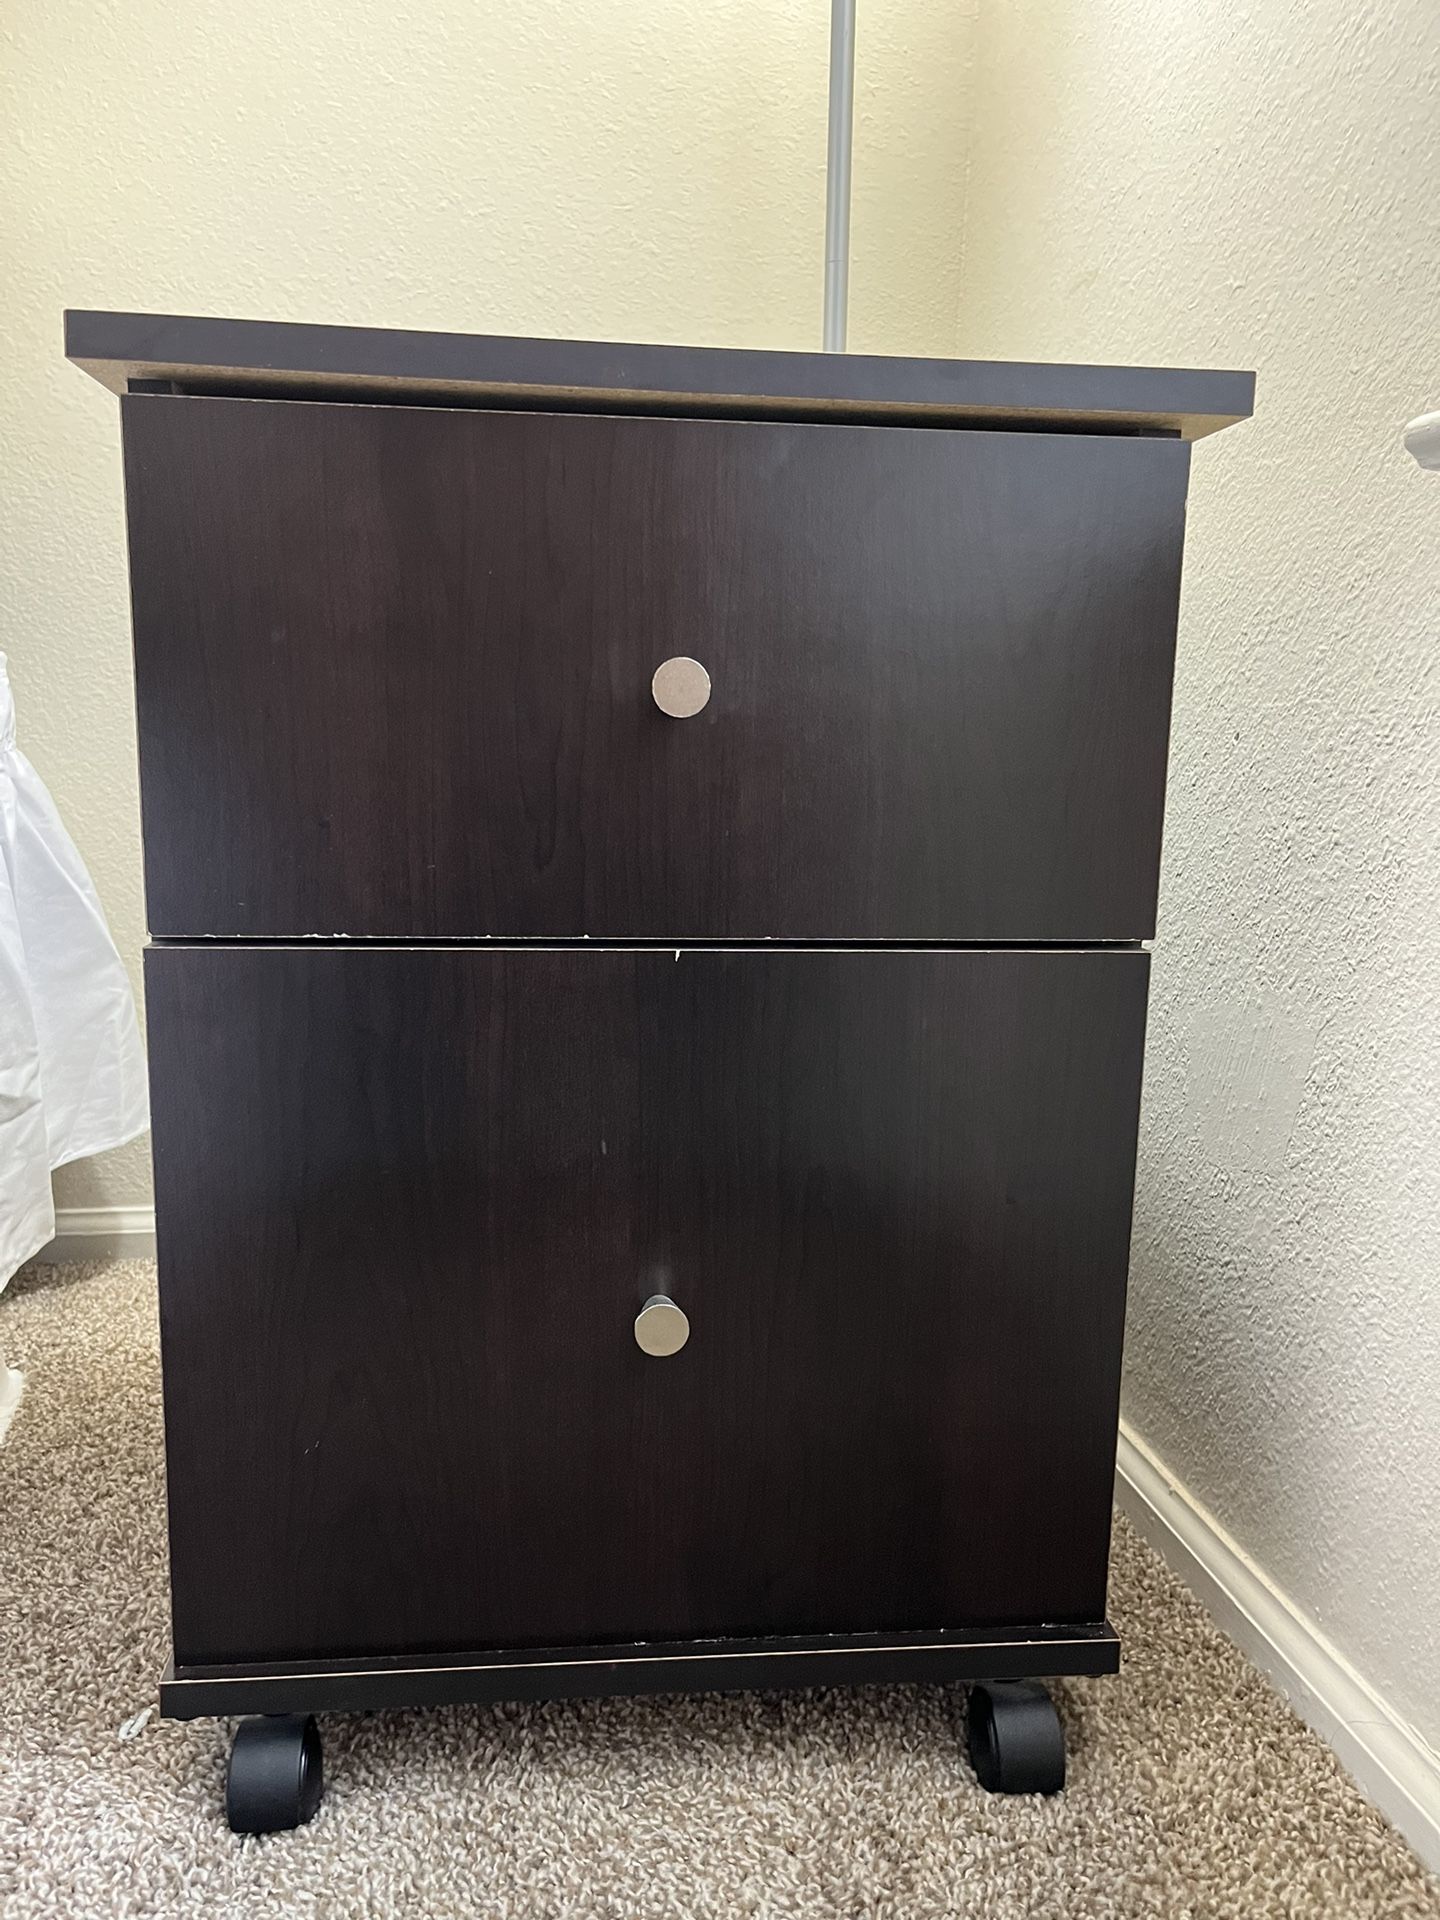 Pair of Night Stands/Desk Drawers on wheels